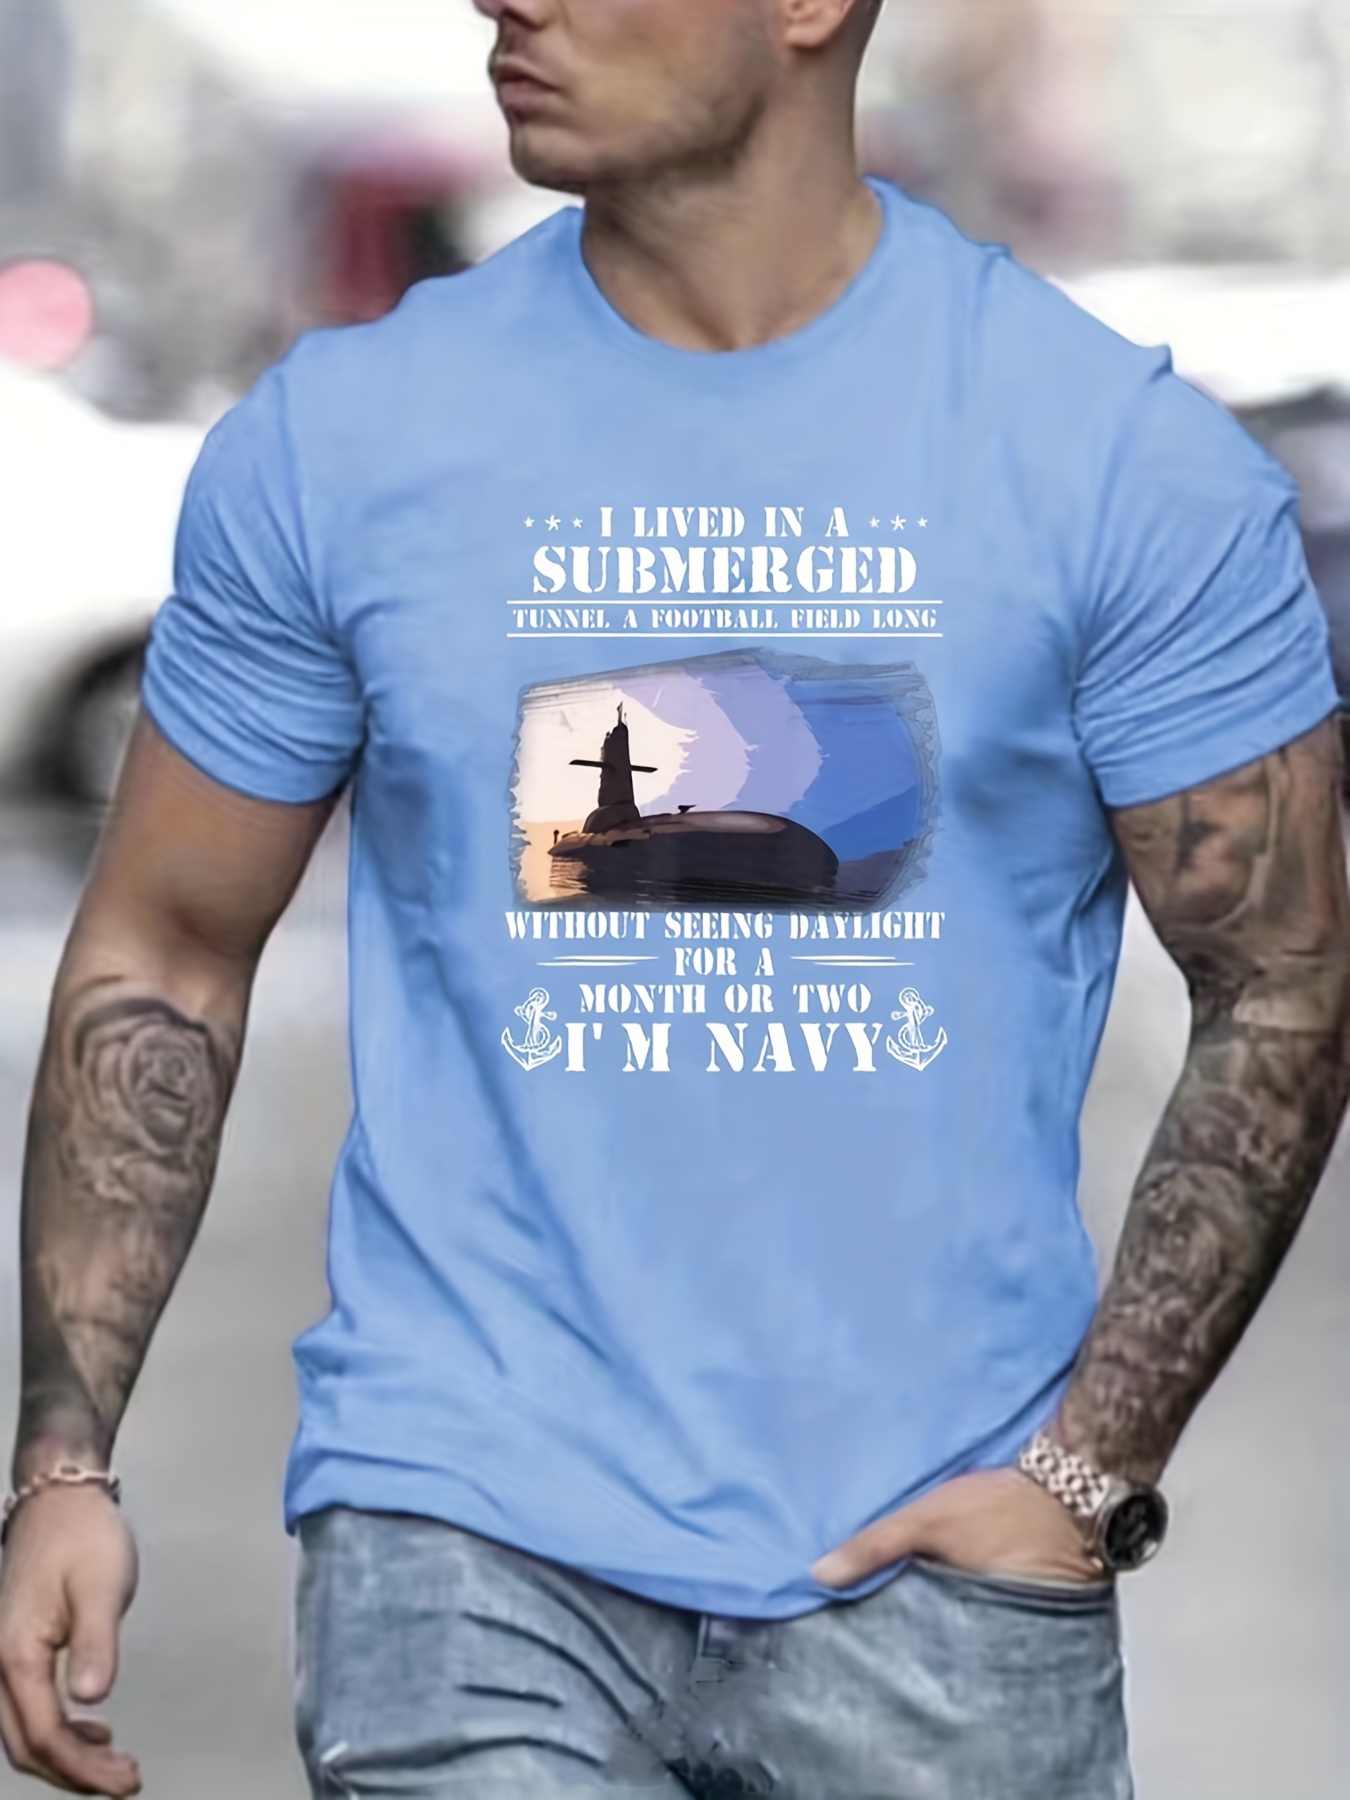 Tees For Men, 'I'm Navy' Print T Shirt, Casual Short Sleeve Tshirt For  Summer Spring Fall, Tops As Gifts, For Veterans Day